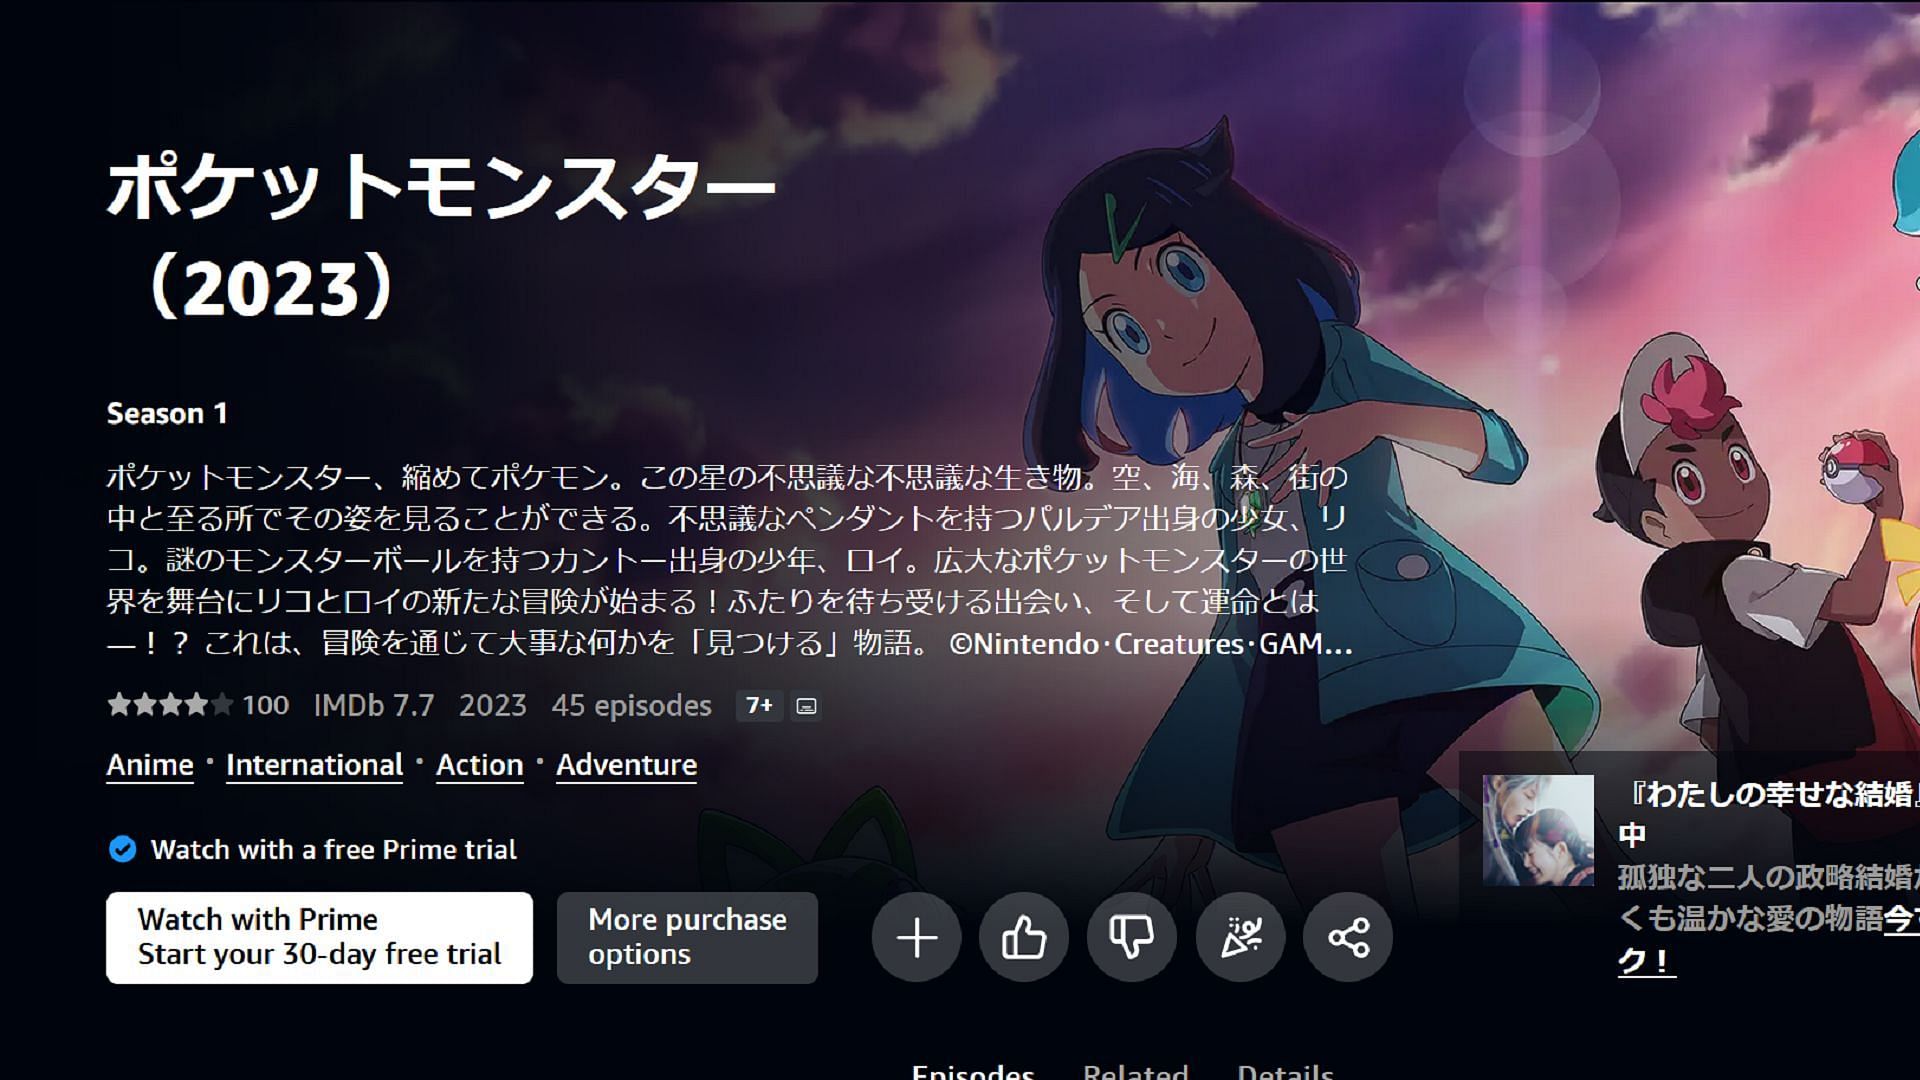 Pokemon Horizons episodes can be watched via Prime Video in Japan (Image via The Pokemon Company/Amazon)